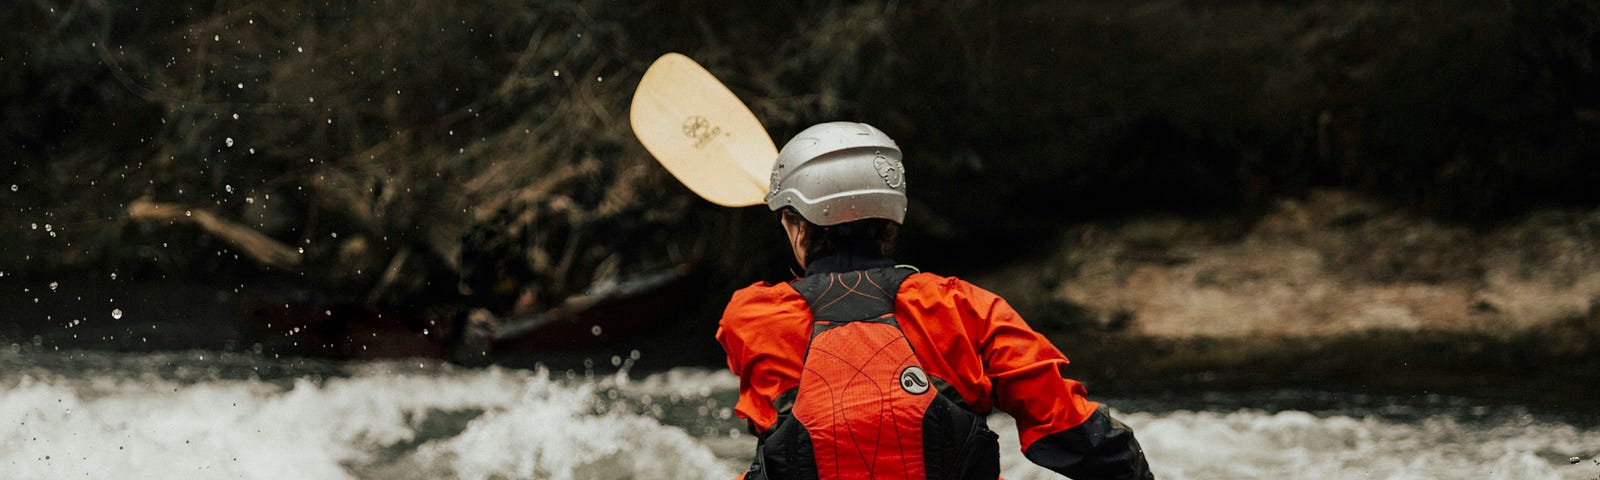 A kayaker wearing a helmet heading into white water.